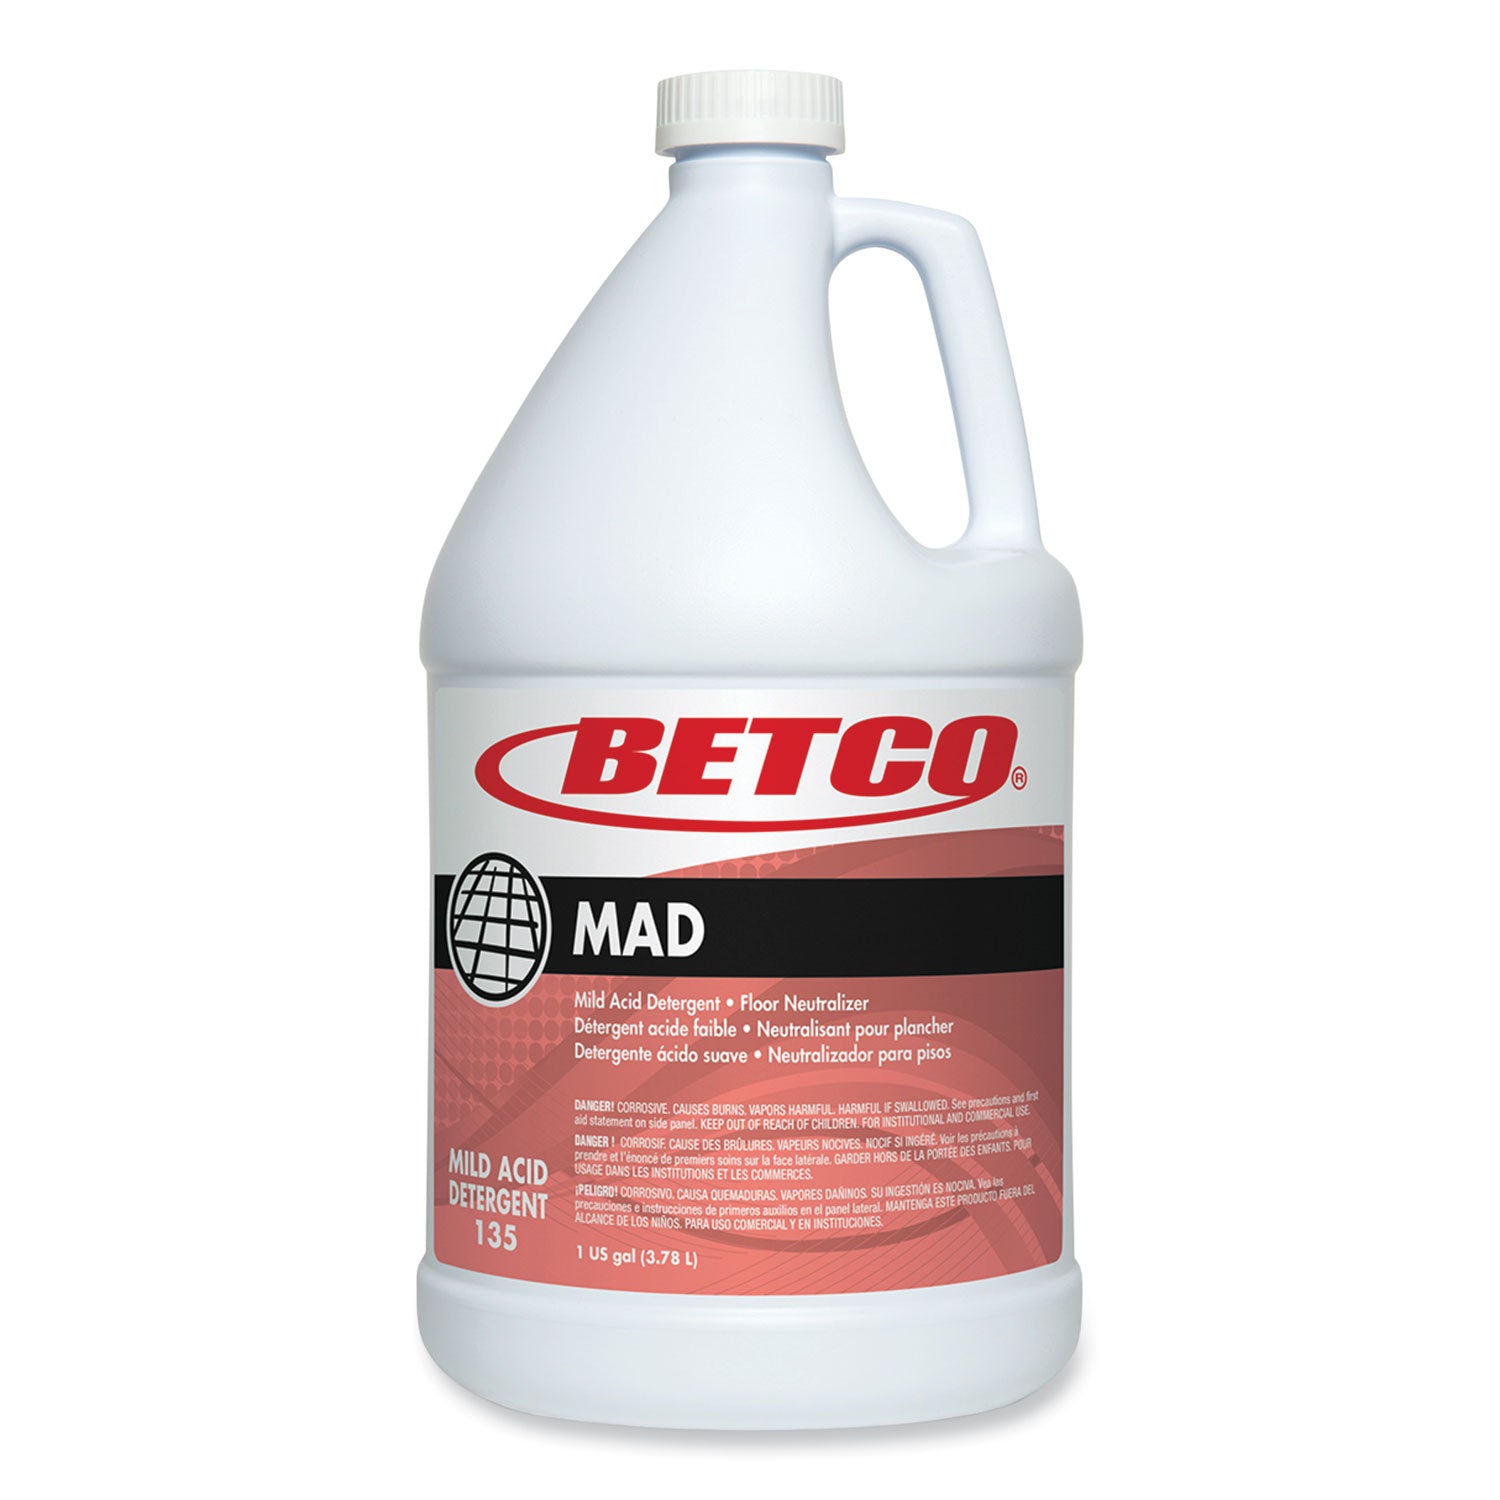 mad-detergent-characteristic-scent-1-gal-4-carton_bet1350400 - 1